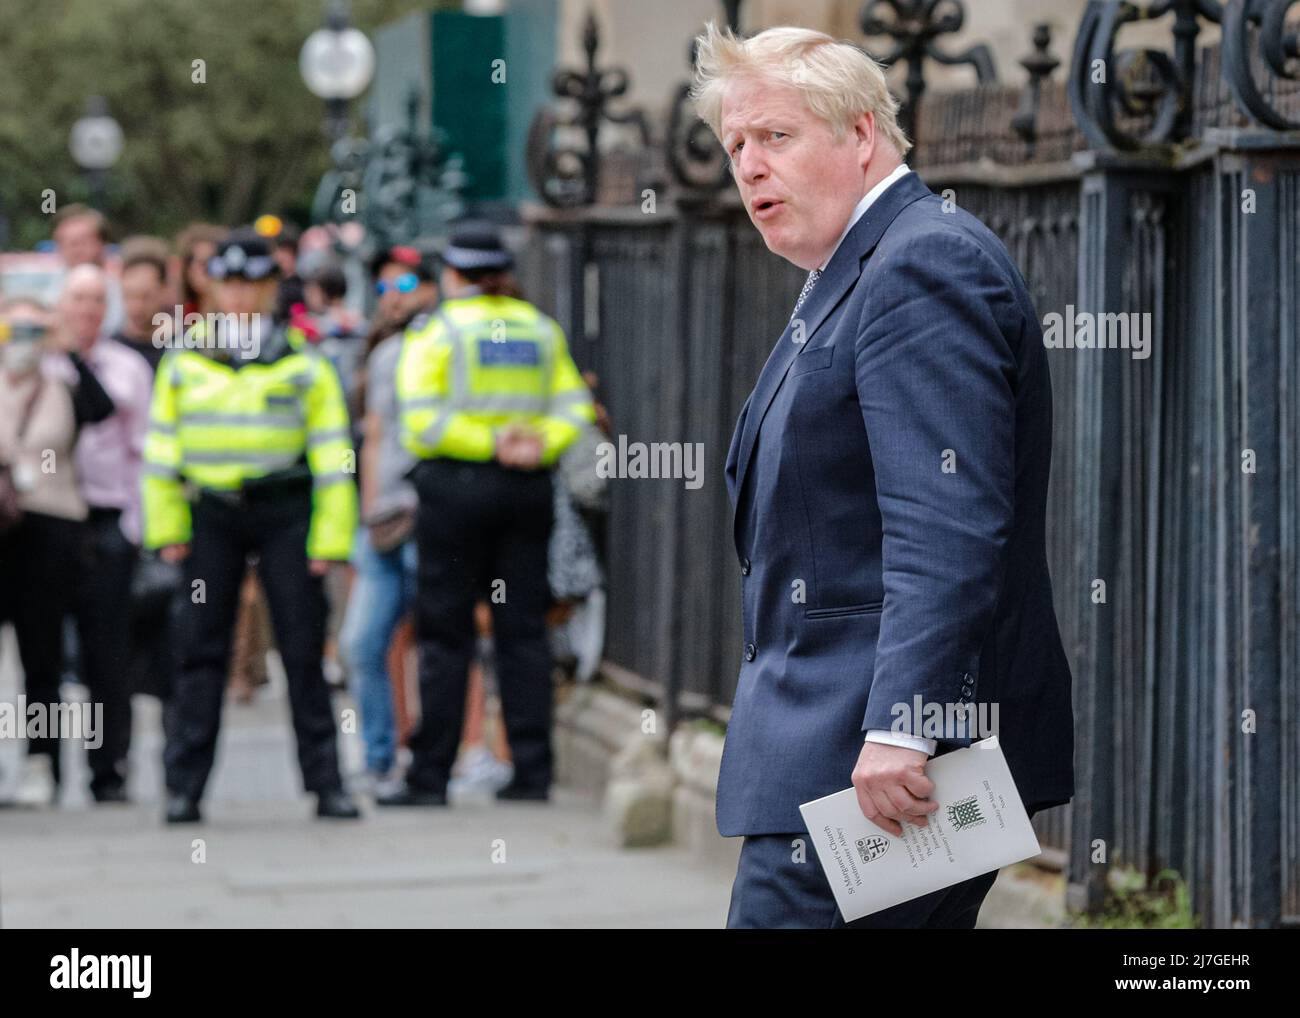 London, UK. 9th May, 2022. Prime Minister Boris Johnson exits the church. The memorial service for MP James Brokenshire, who died aged 53 last year, is held at St Margaret 's Church in the grounds of Westminster Abbey today. The service is attended by Prime Minister Boris Johnson, former Prime Ministers David Cameron and Theresa May, cabinet ministers, MPs and other guests. Credit: Imageplotter/Alamy Live News Stock Photo